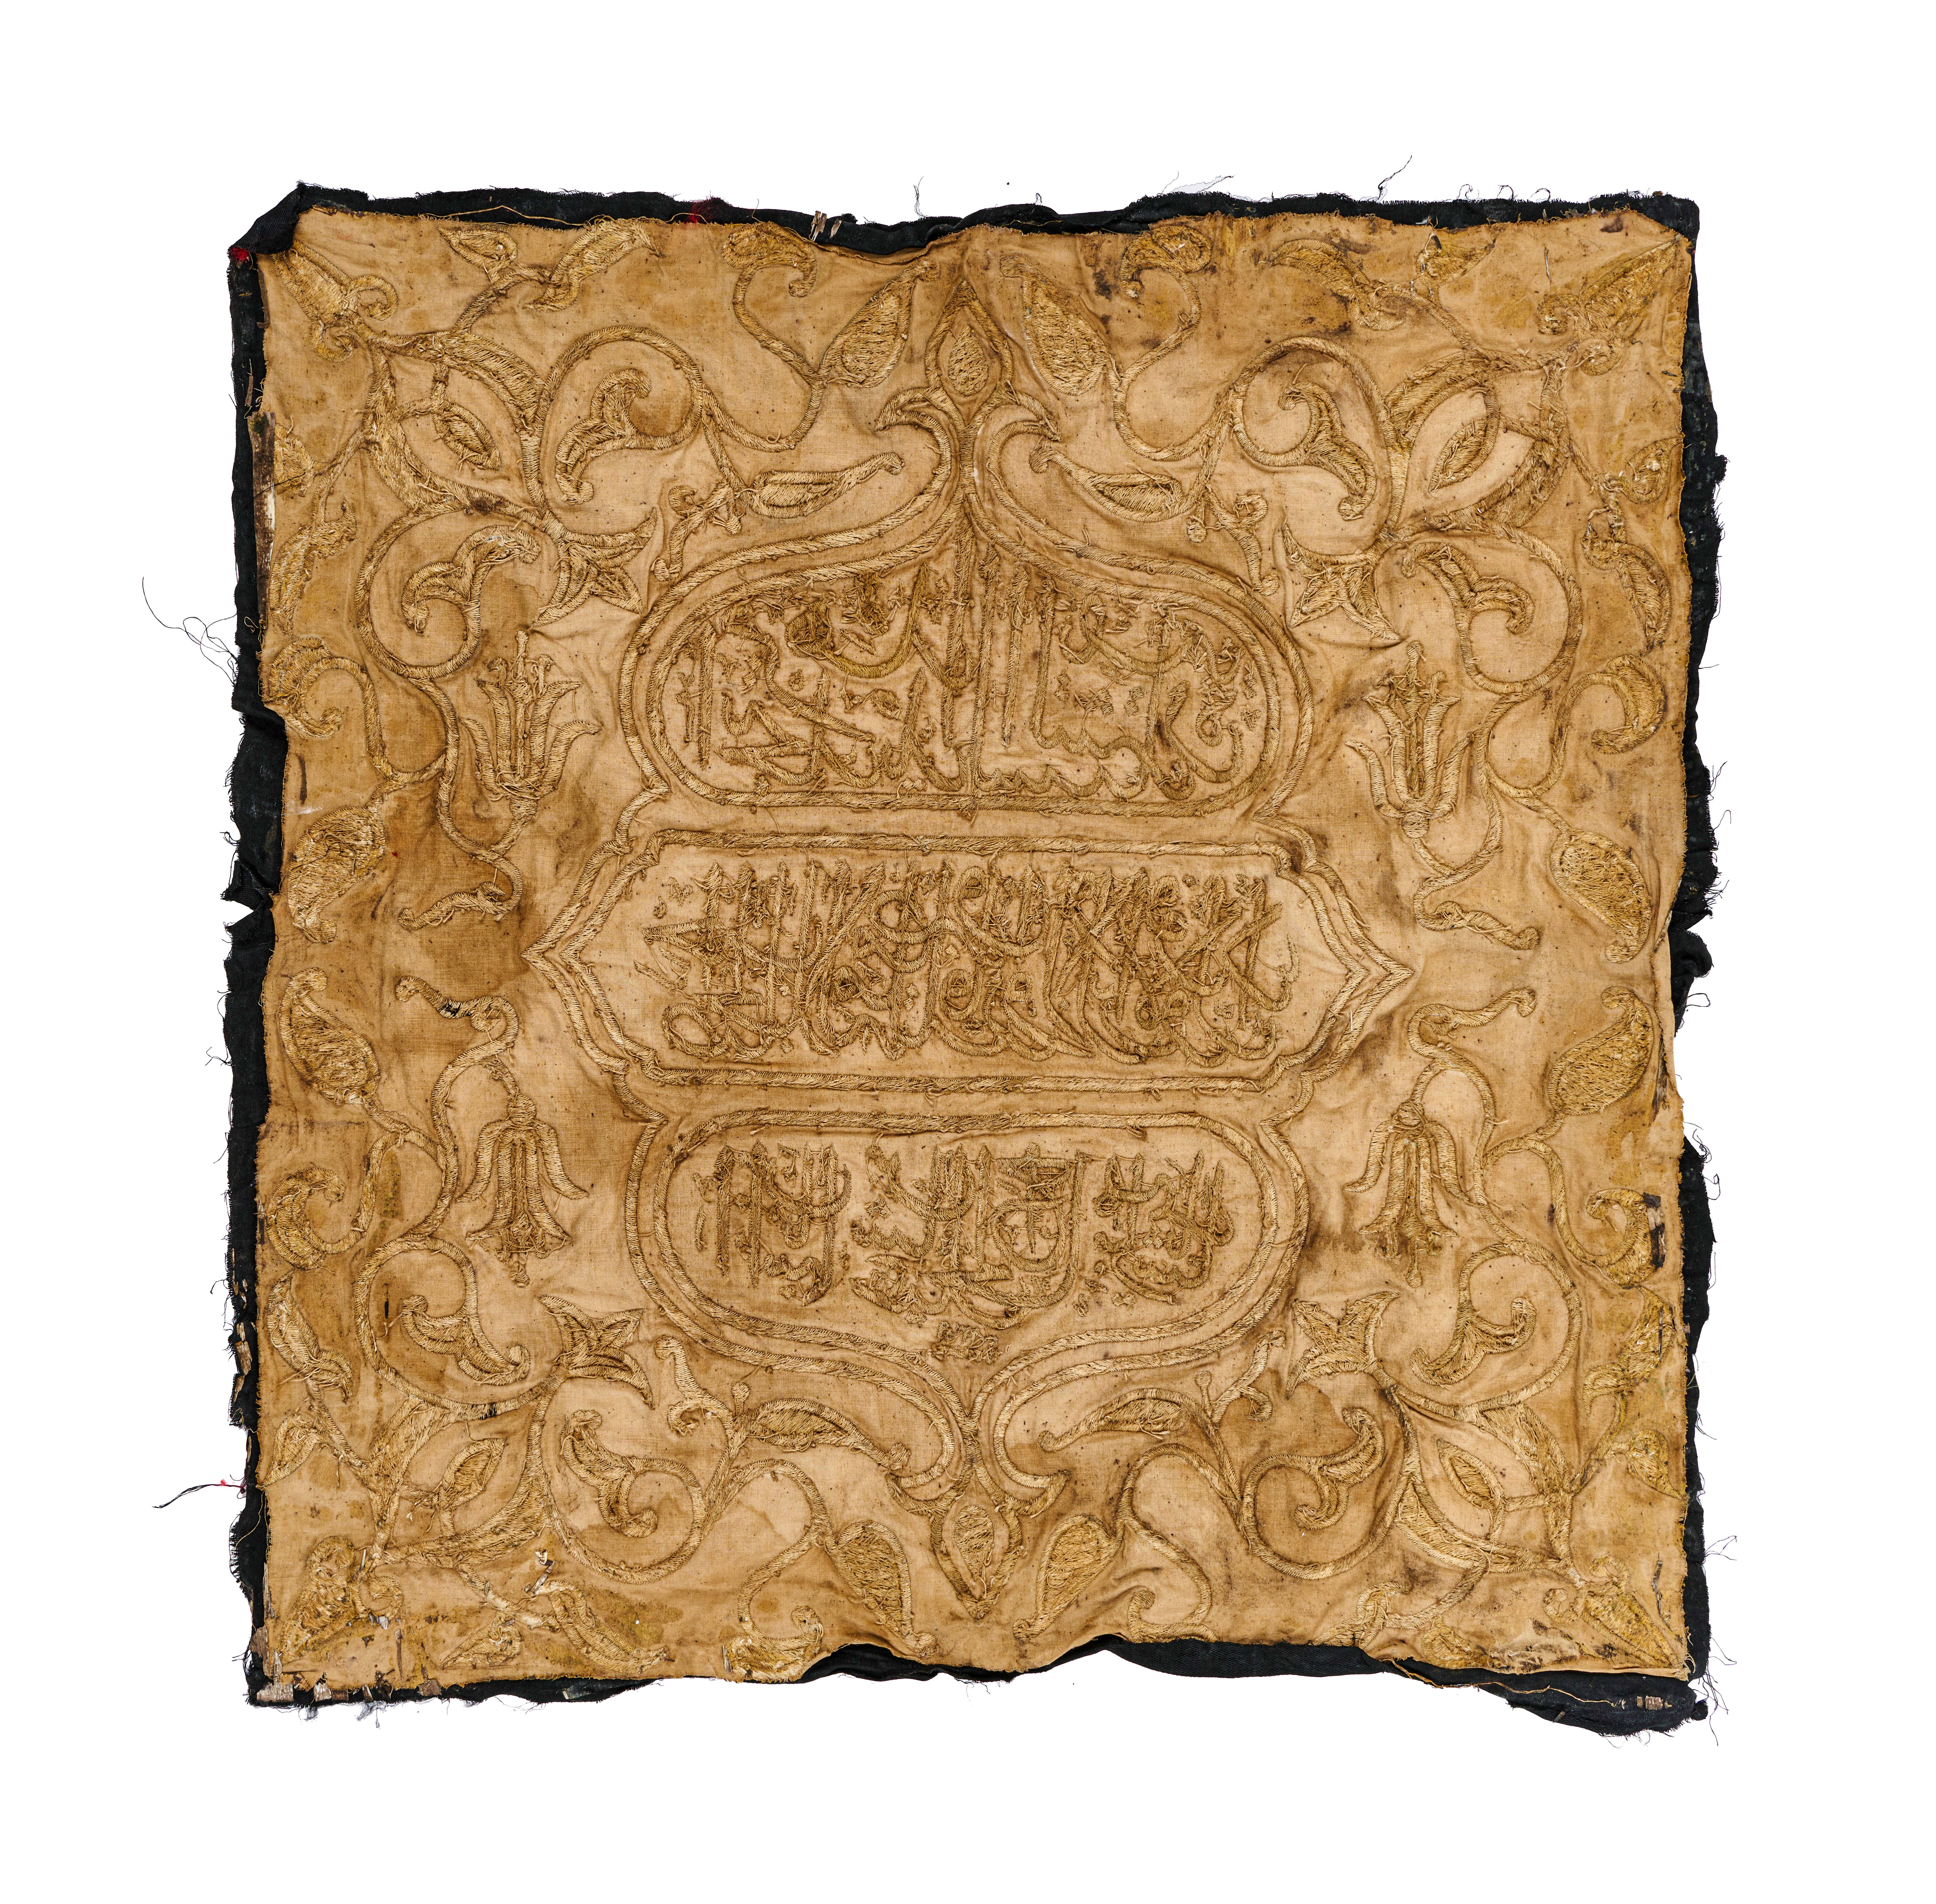 A GILT AND SILVER EMBROIDERED METAL THREAD TEXTILE HANGING DATED 1309AH, 19TH CENTURY - Image 3 of 3